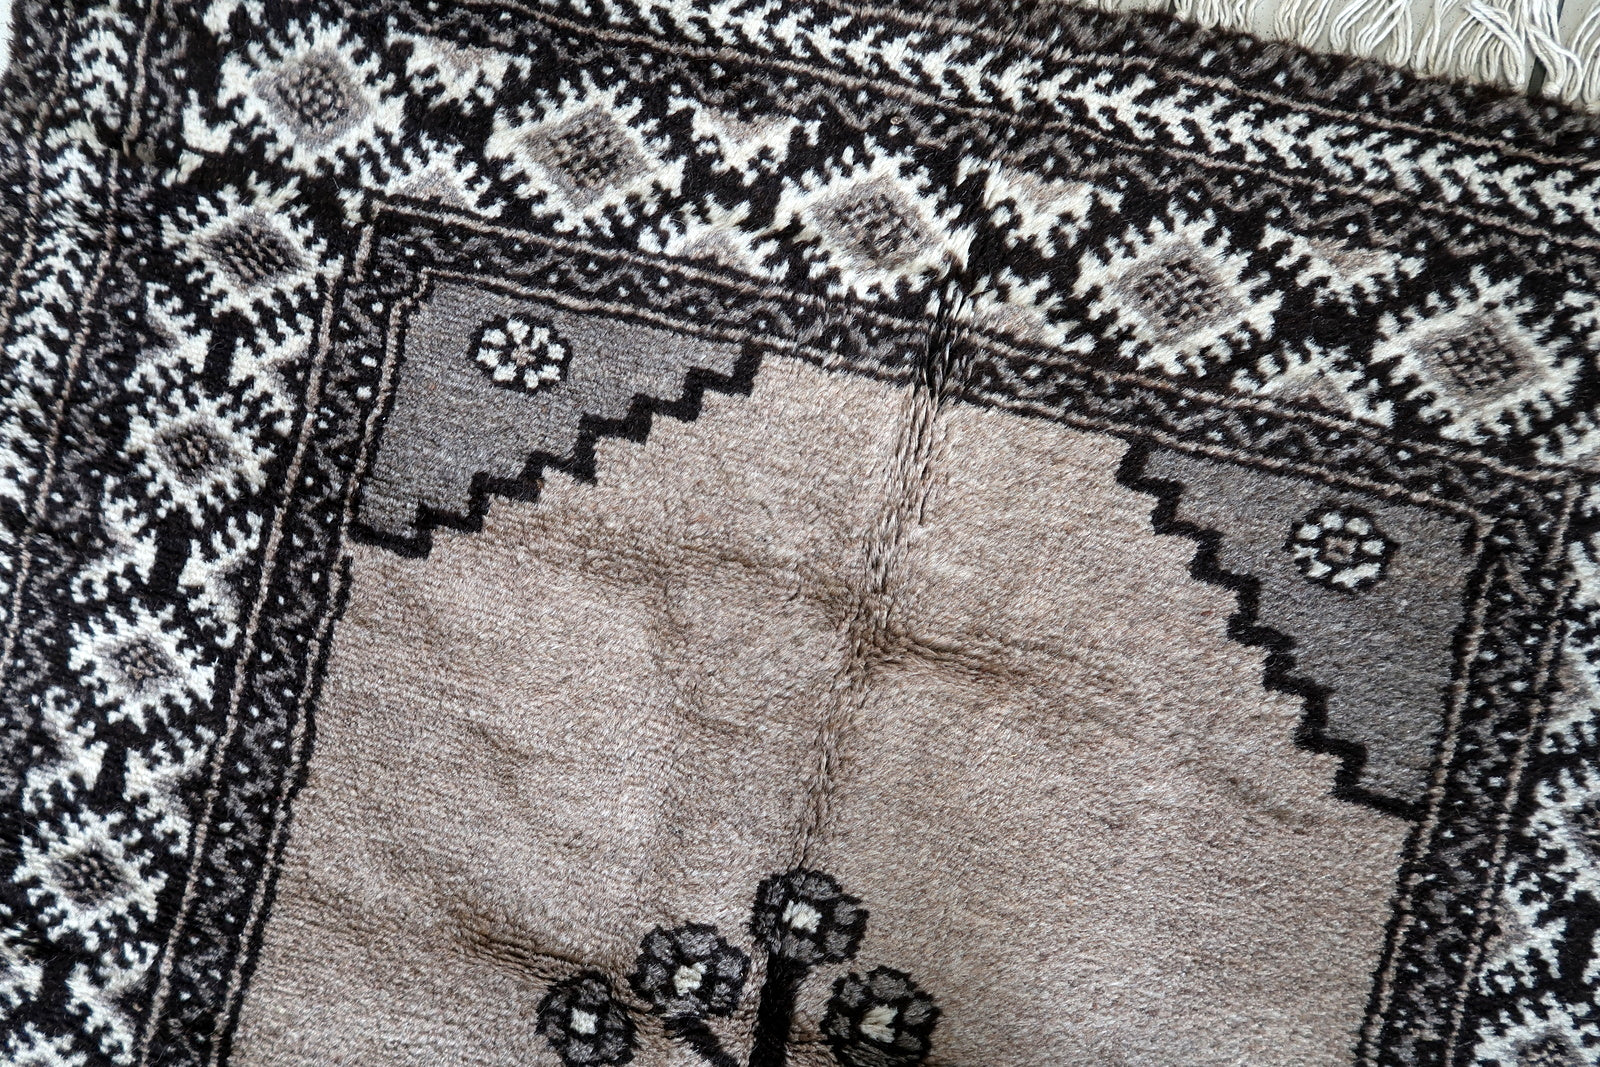 Intricate Design Blending Traditional Persian Elements with Modern Aesthetic on Handmade Gabbeh Rug - 1970s